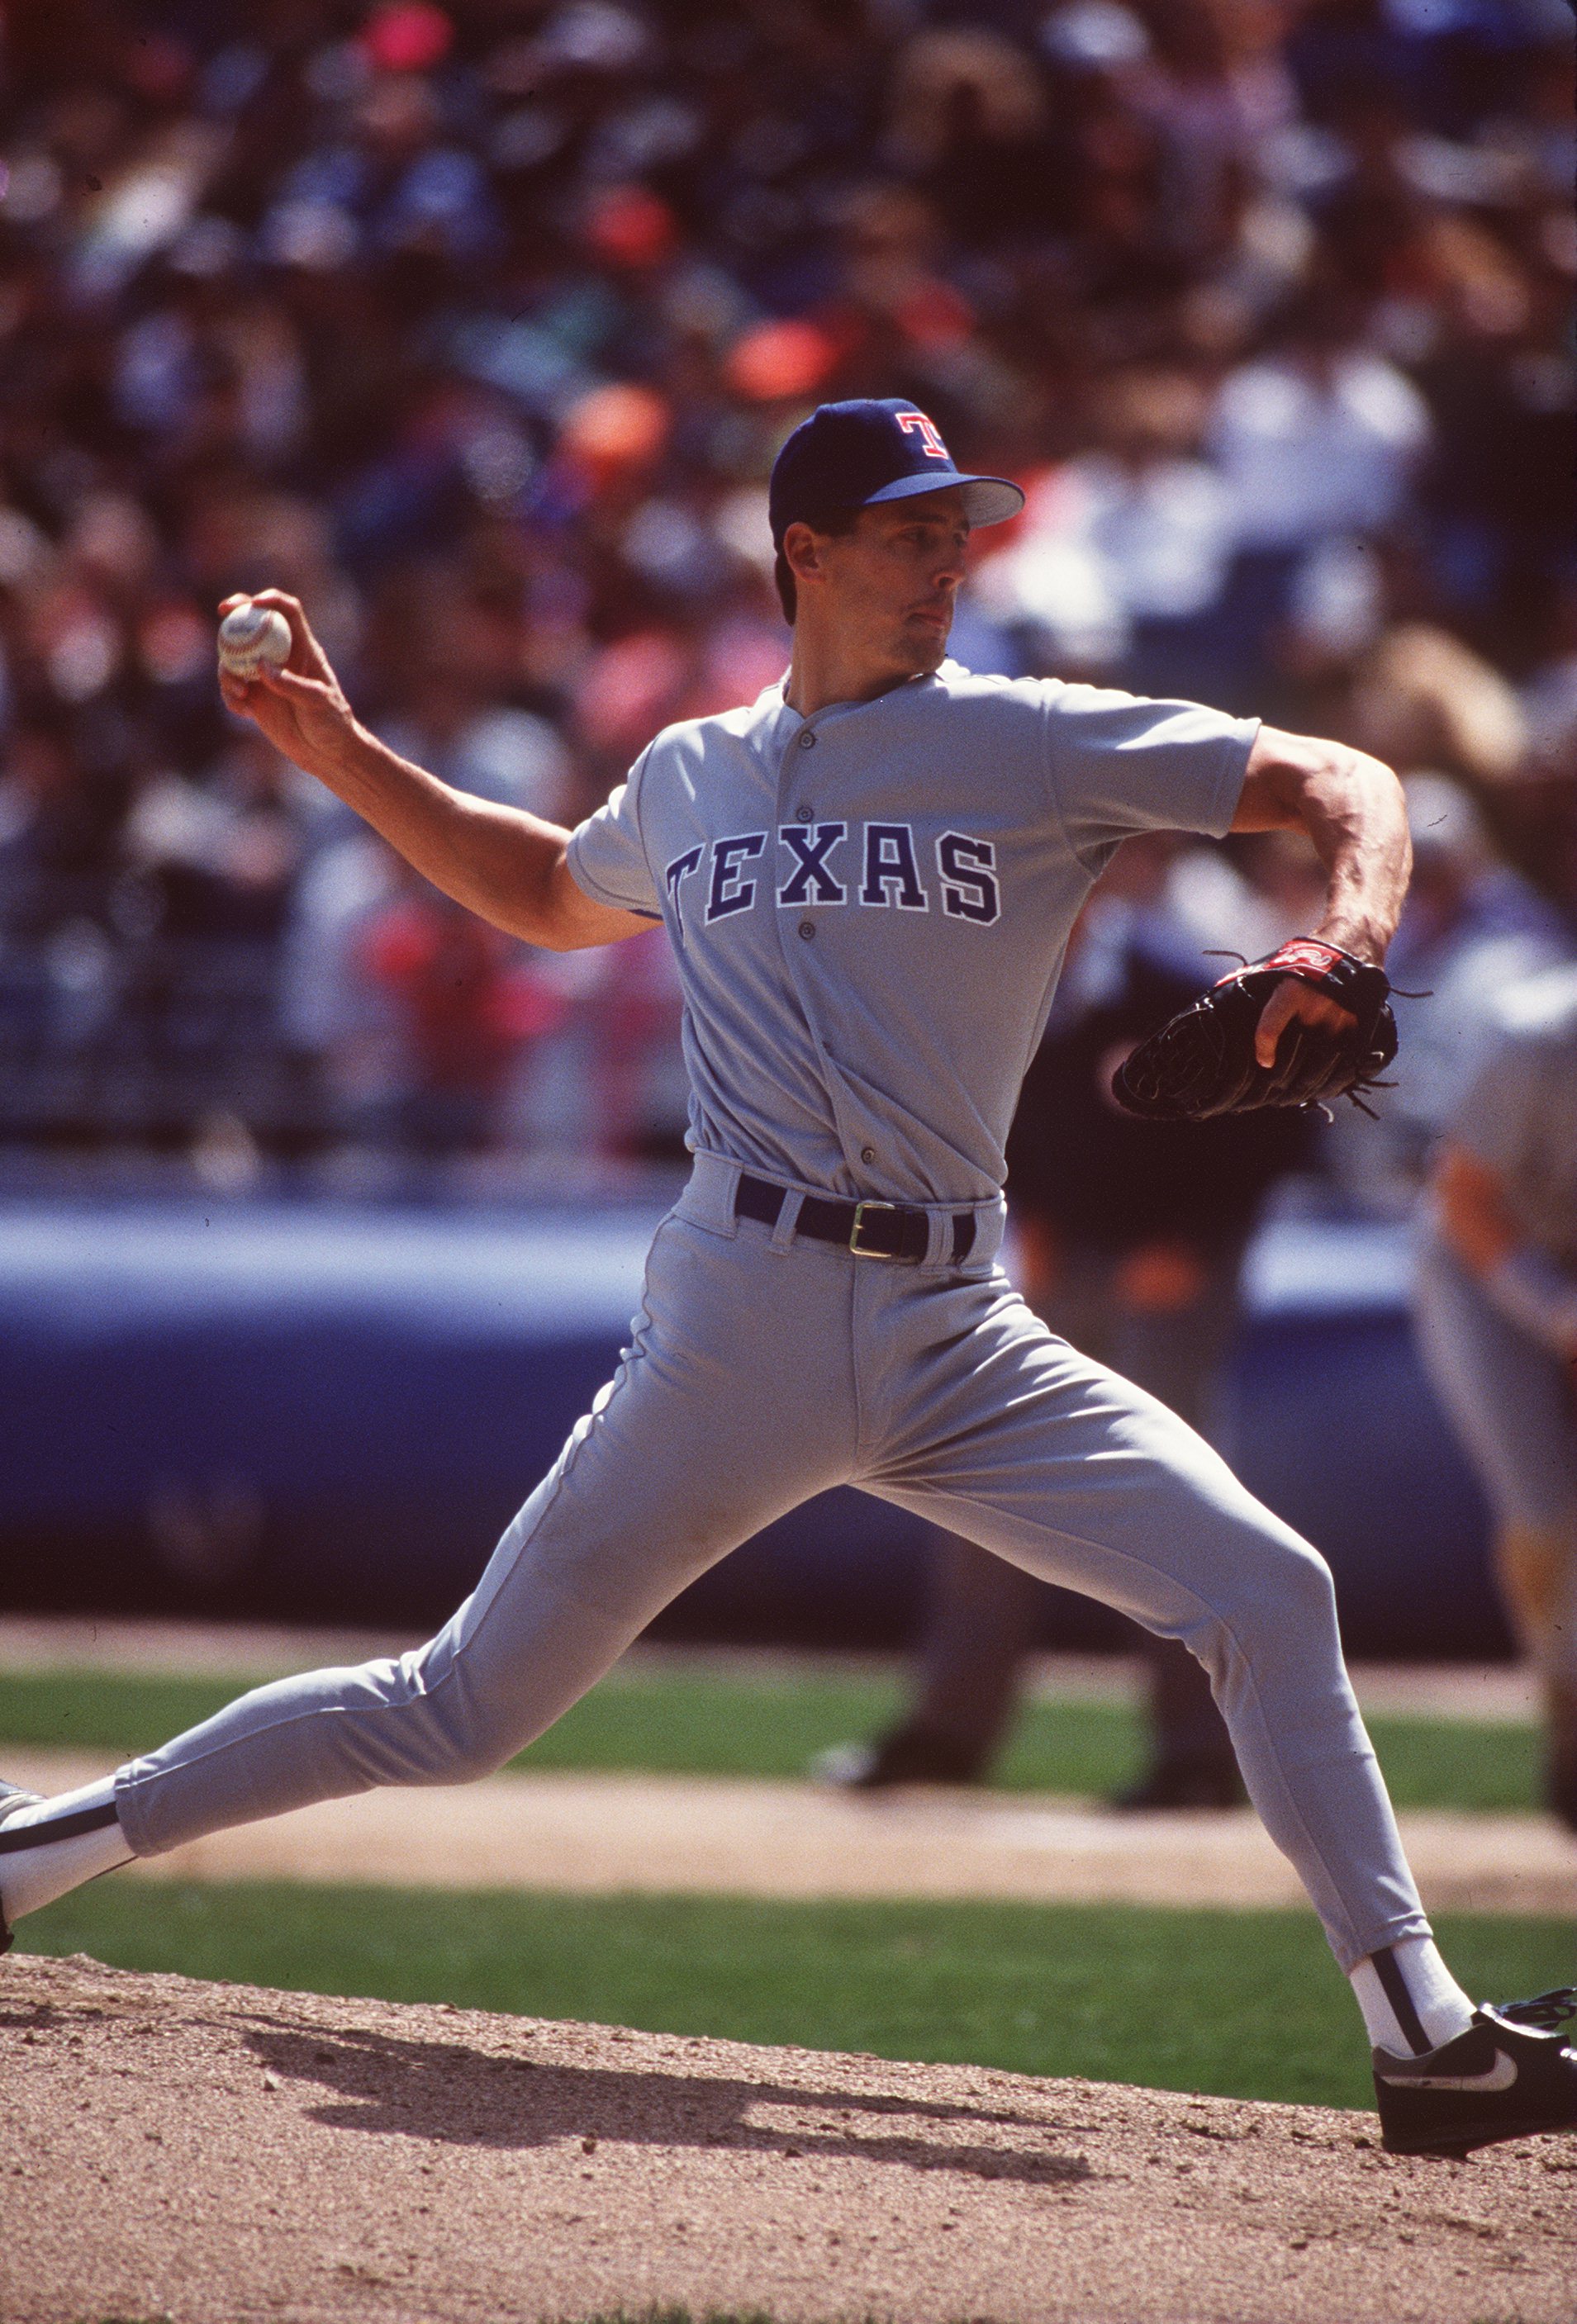 TEXAS RANGERS PITCHER KEVIN BROWN DELIVERS A PITCH DURING THE 1992 MAJOR LEAGUE BASEBALL SEASON AT COMISKEY PARK IN CHICAGO, ILLINOIS.